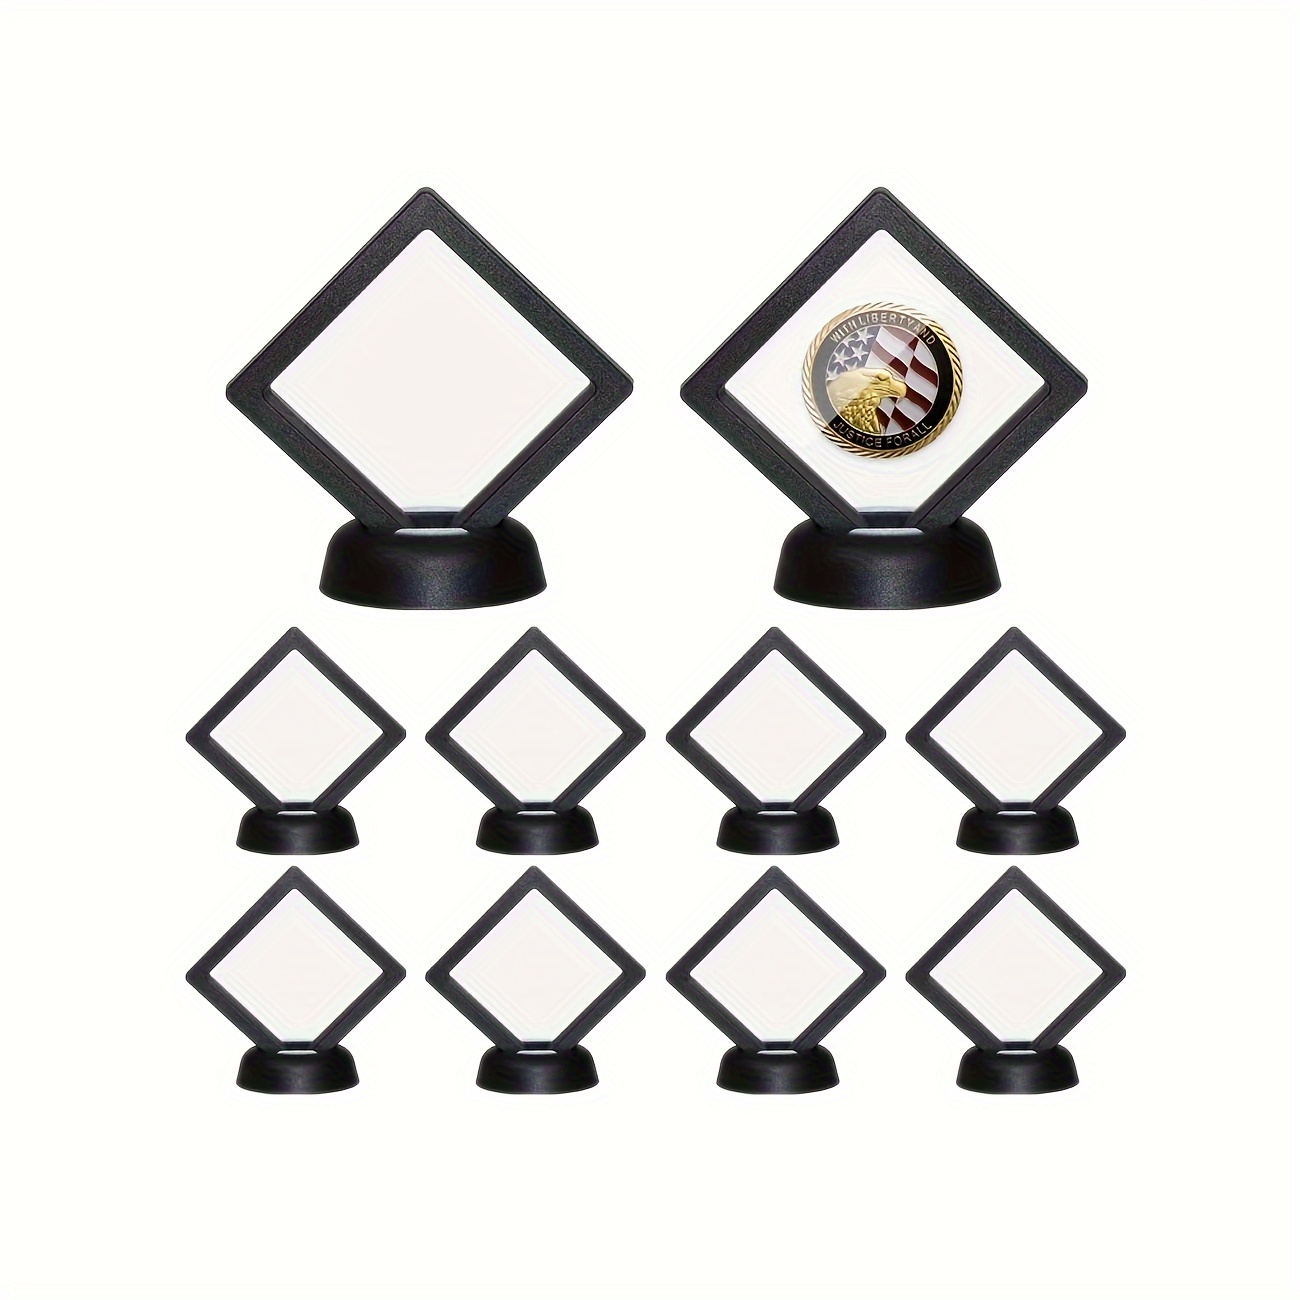 

10pcs 3d Floating Display Case, Black Coins Display Frame For Antique Challenge Coins, Aa Medallion, Jewelry, Shells, Fossils, Gems, Minerals, Rocks, Pins